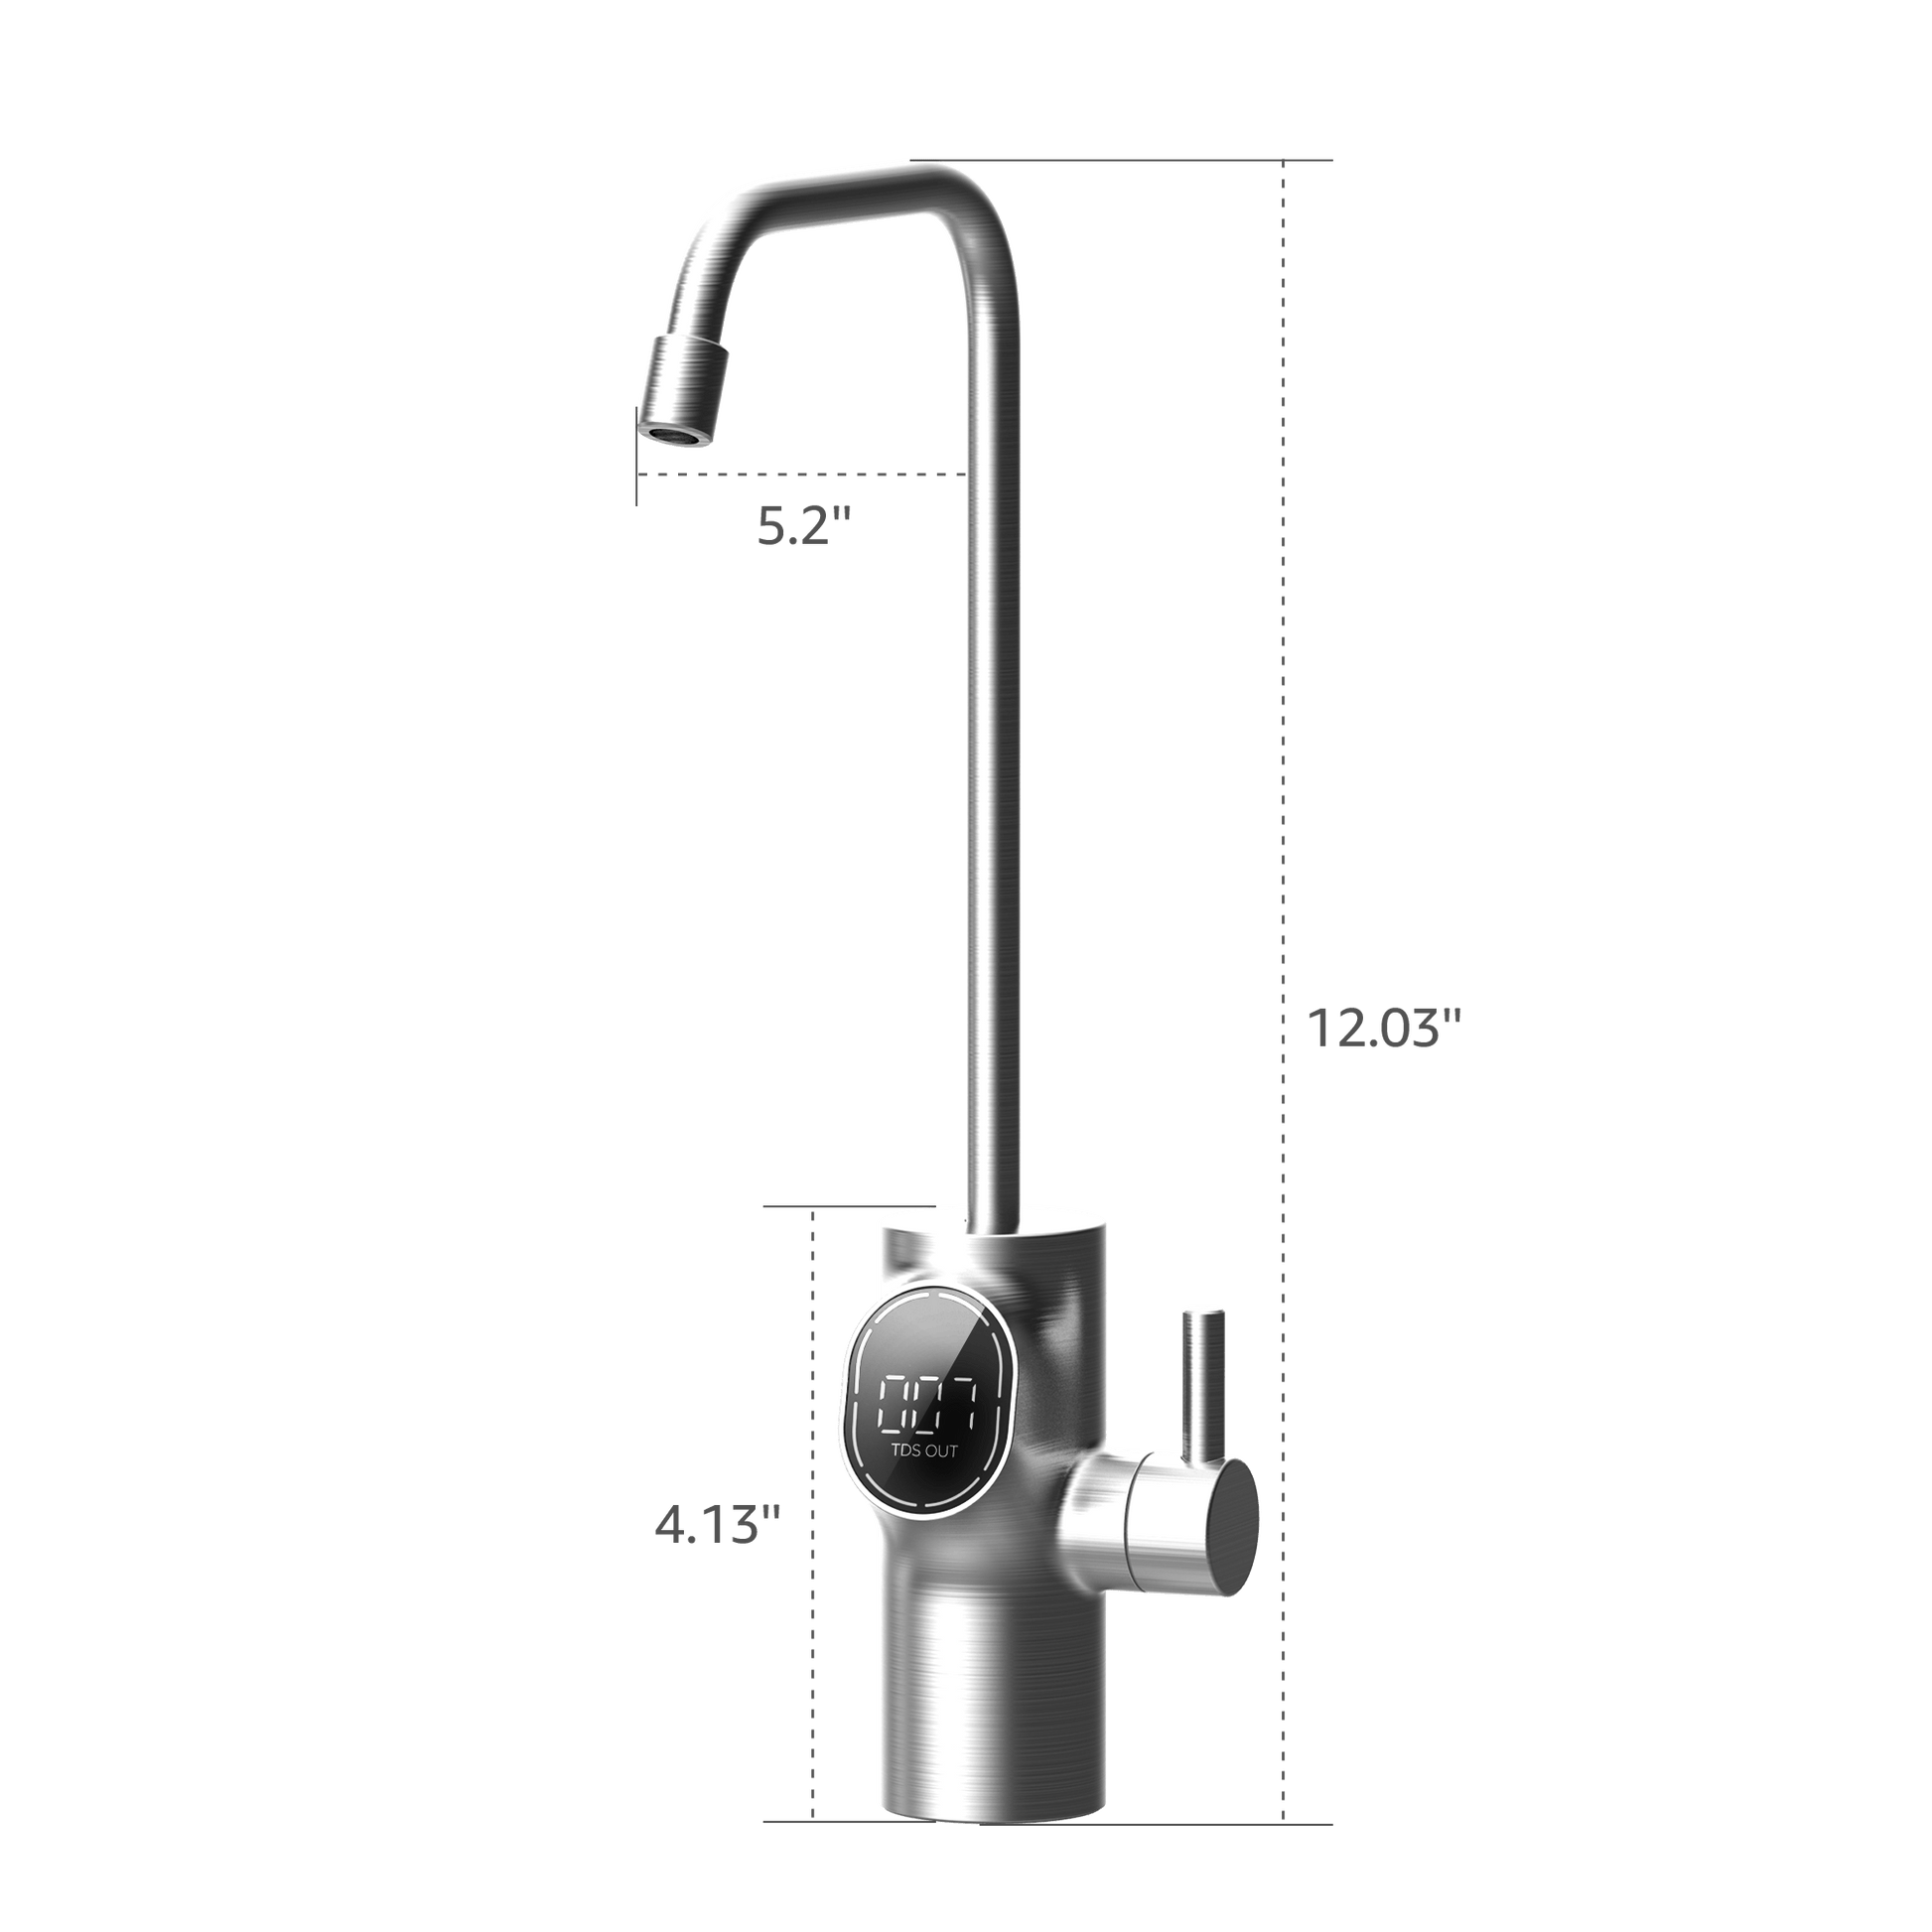 600GPD Under Sink RO System With Small Water Pressure Tank- Waterdrop D6